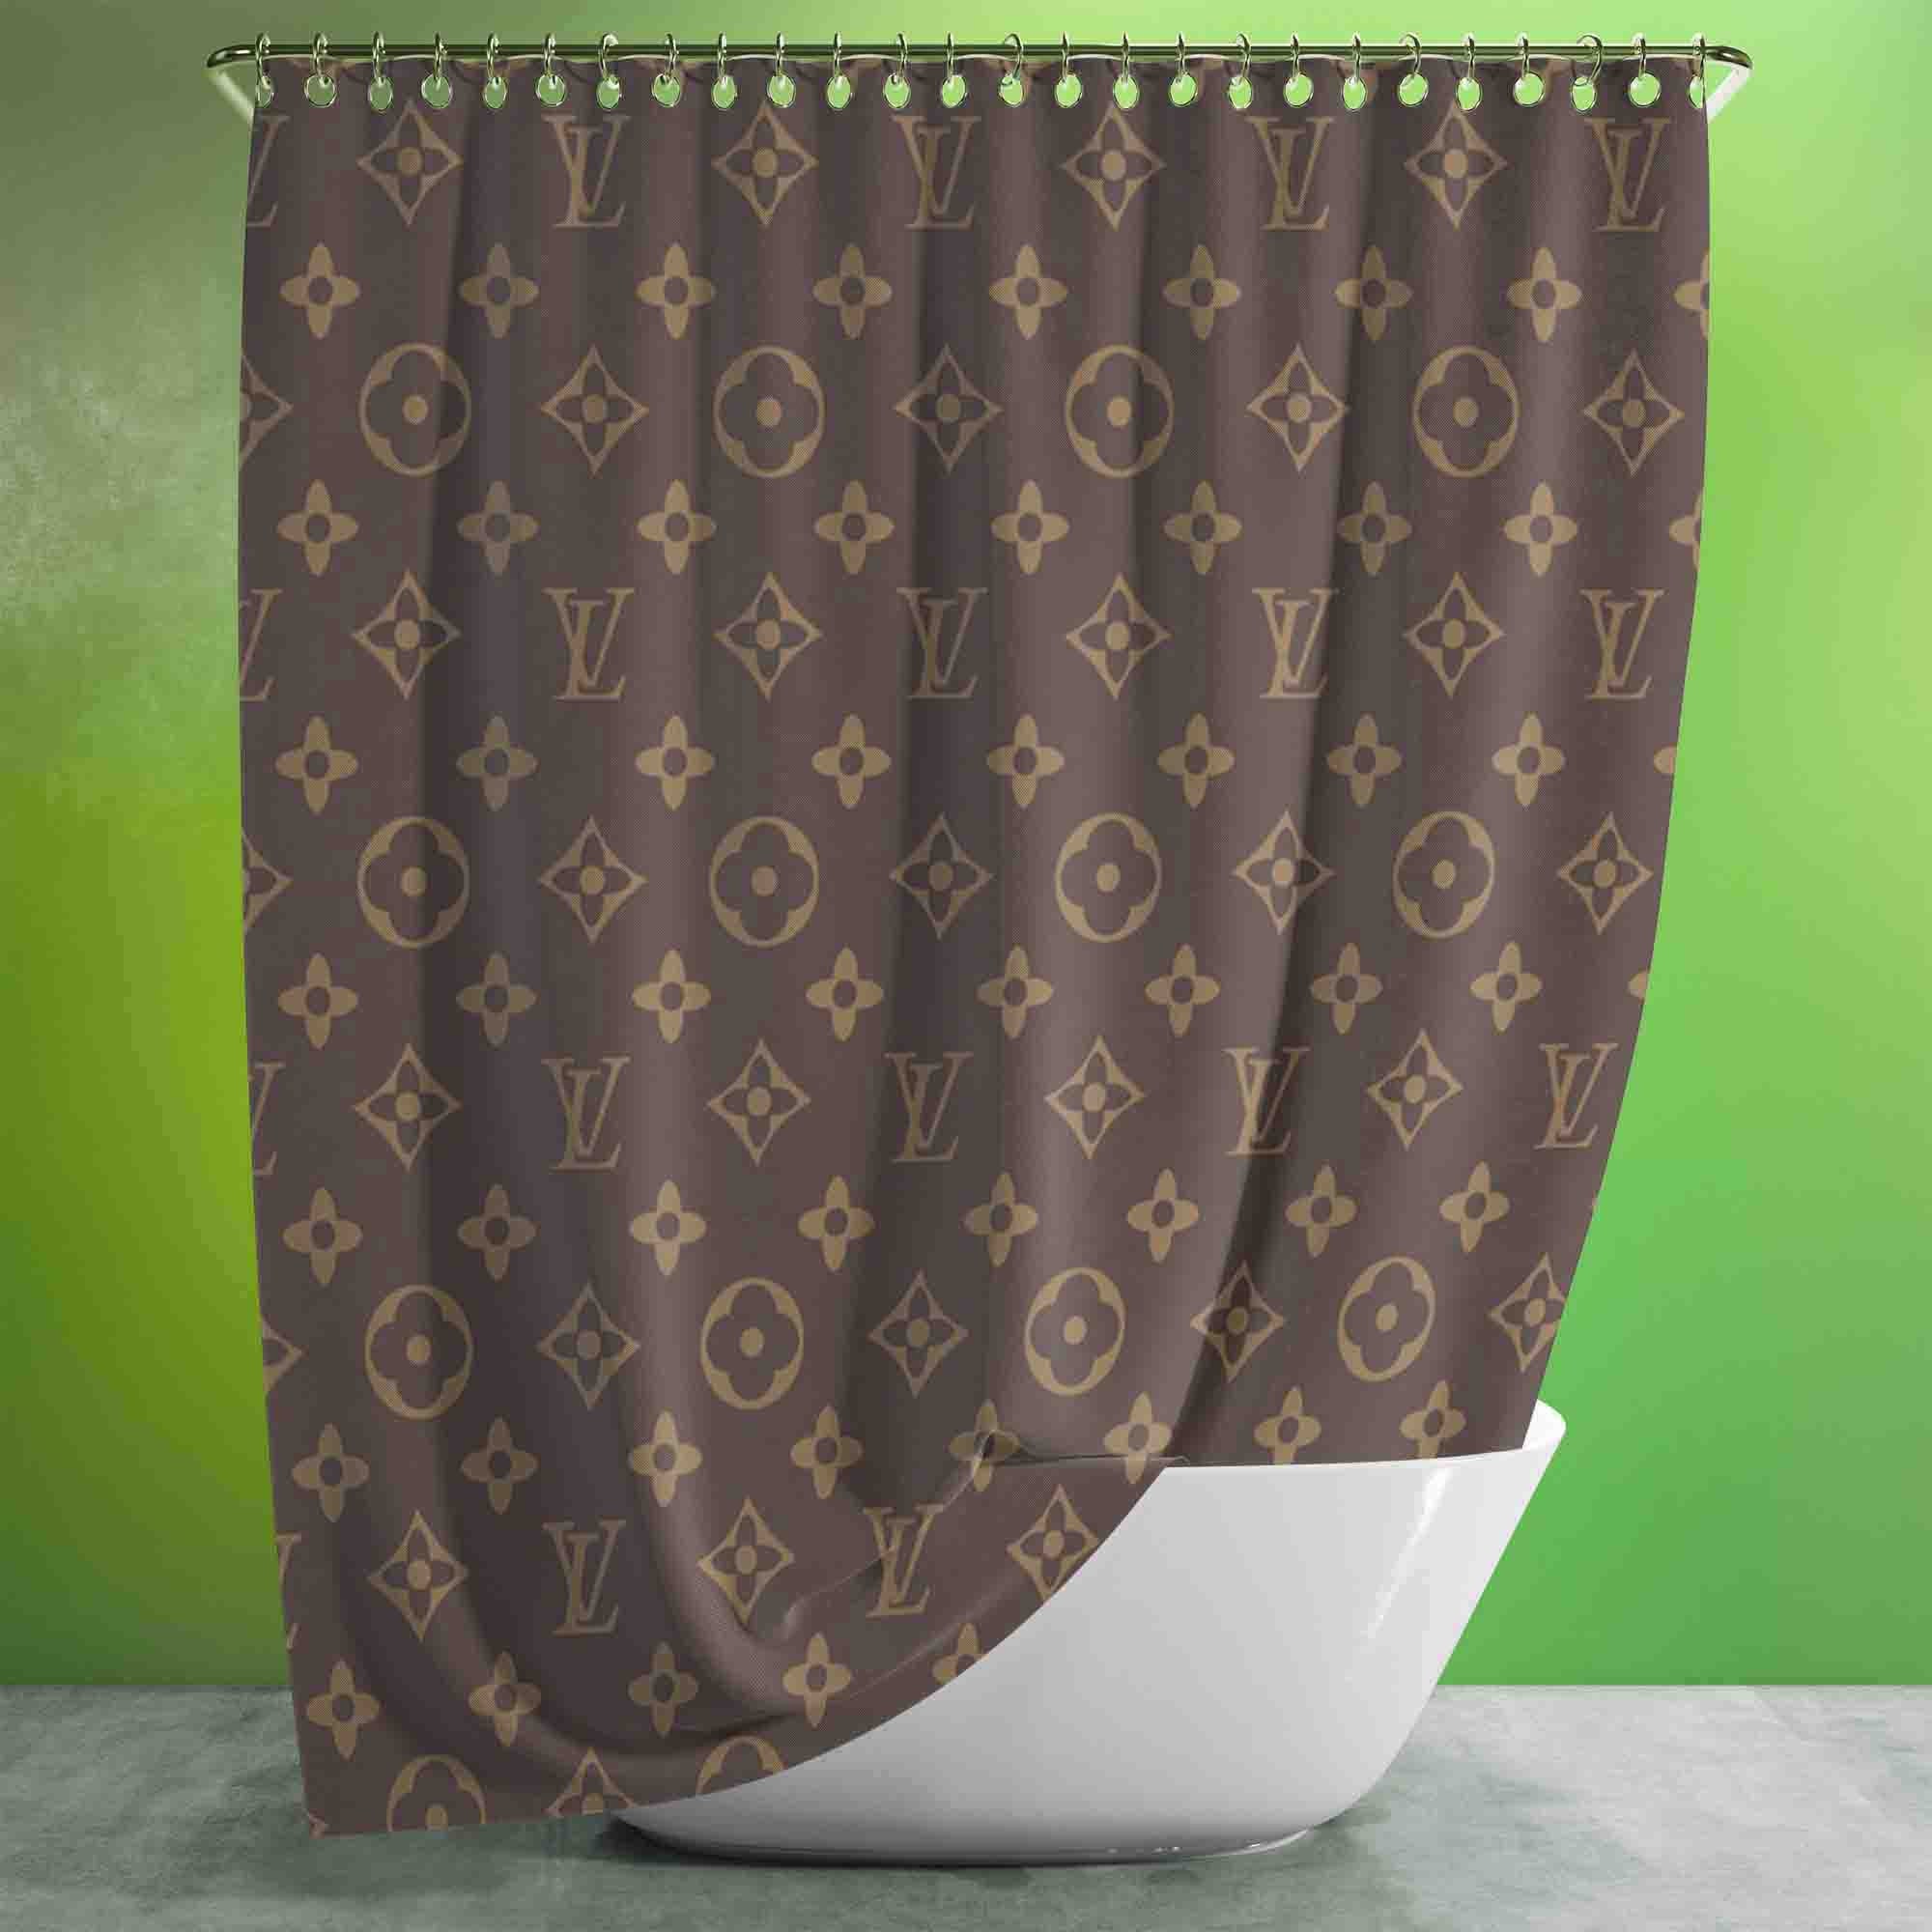 My Favourite New Limited Custom Shower Curtain Classic 